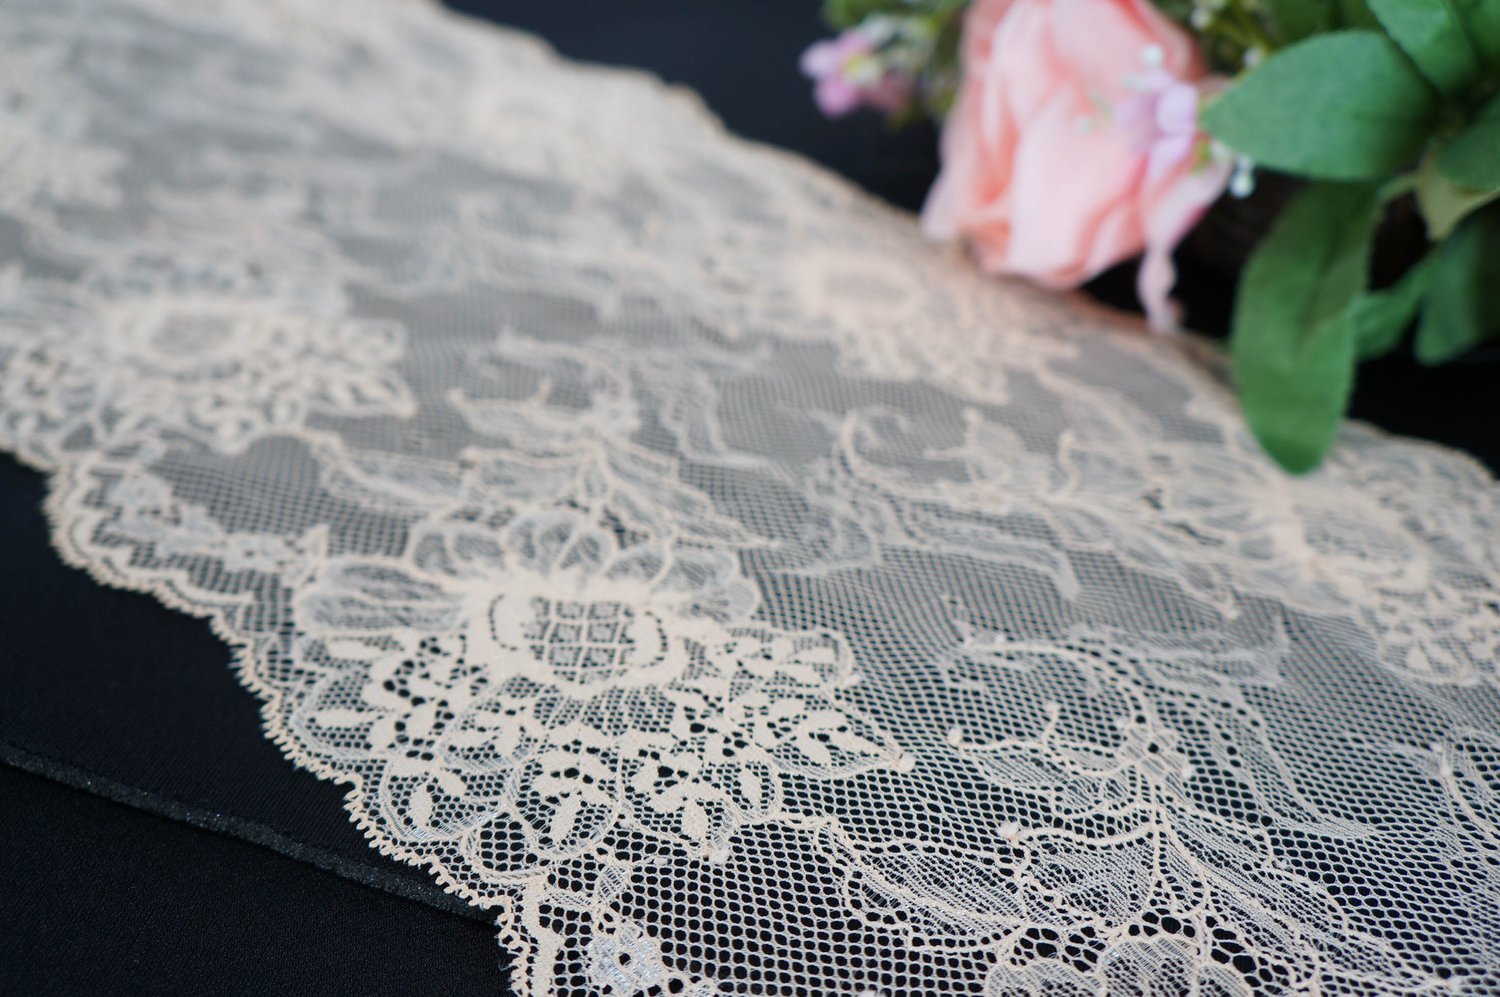 Stretch Lace - Floral Sand - 7.5 (19 cm) Galloon Lace — LilypaDesigns